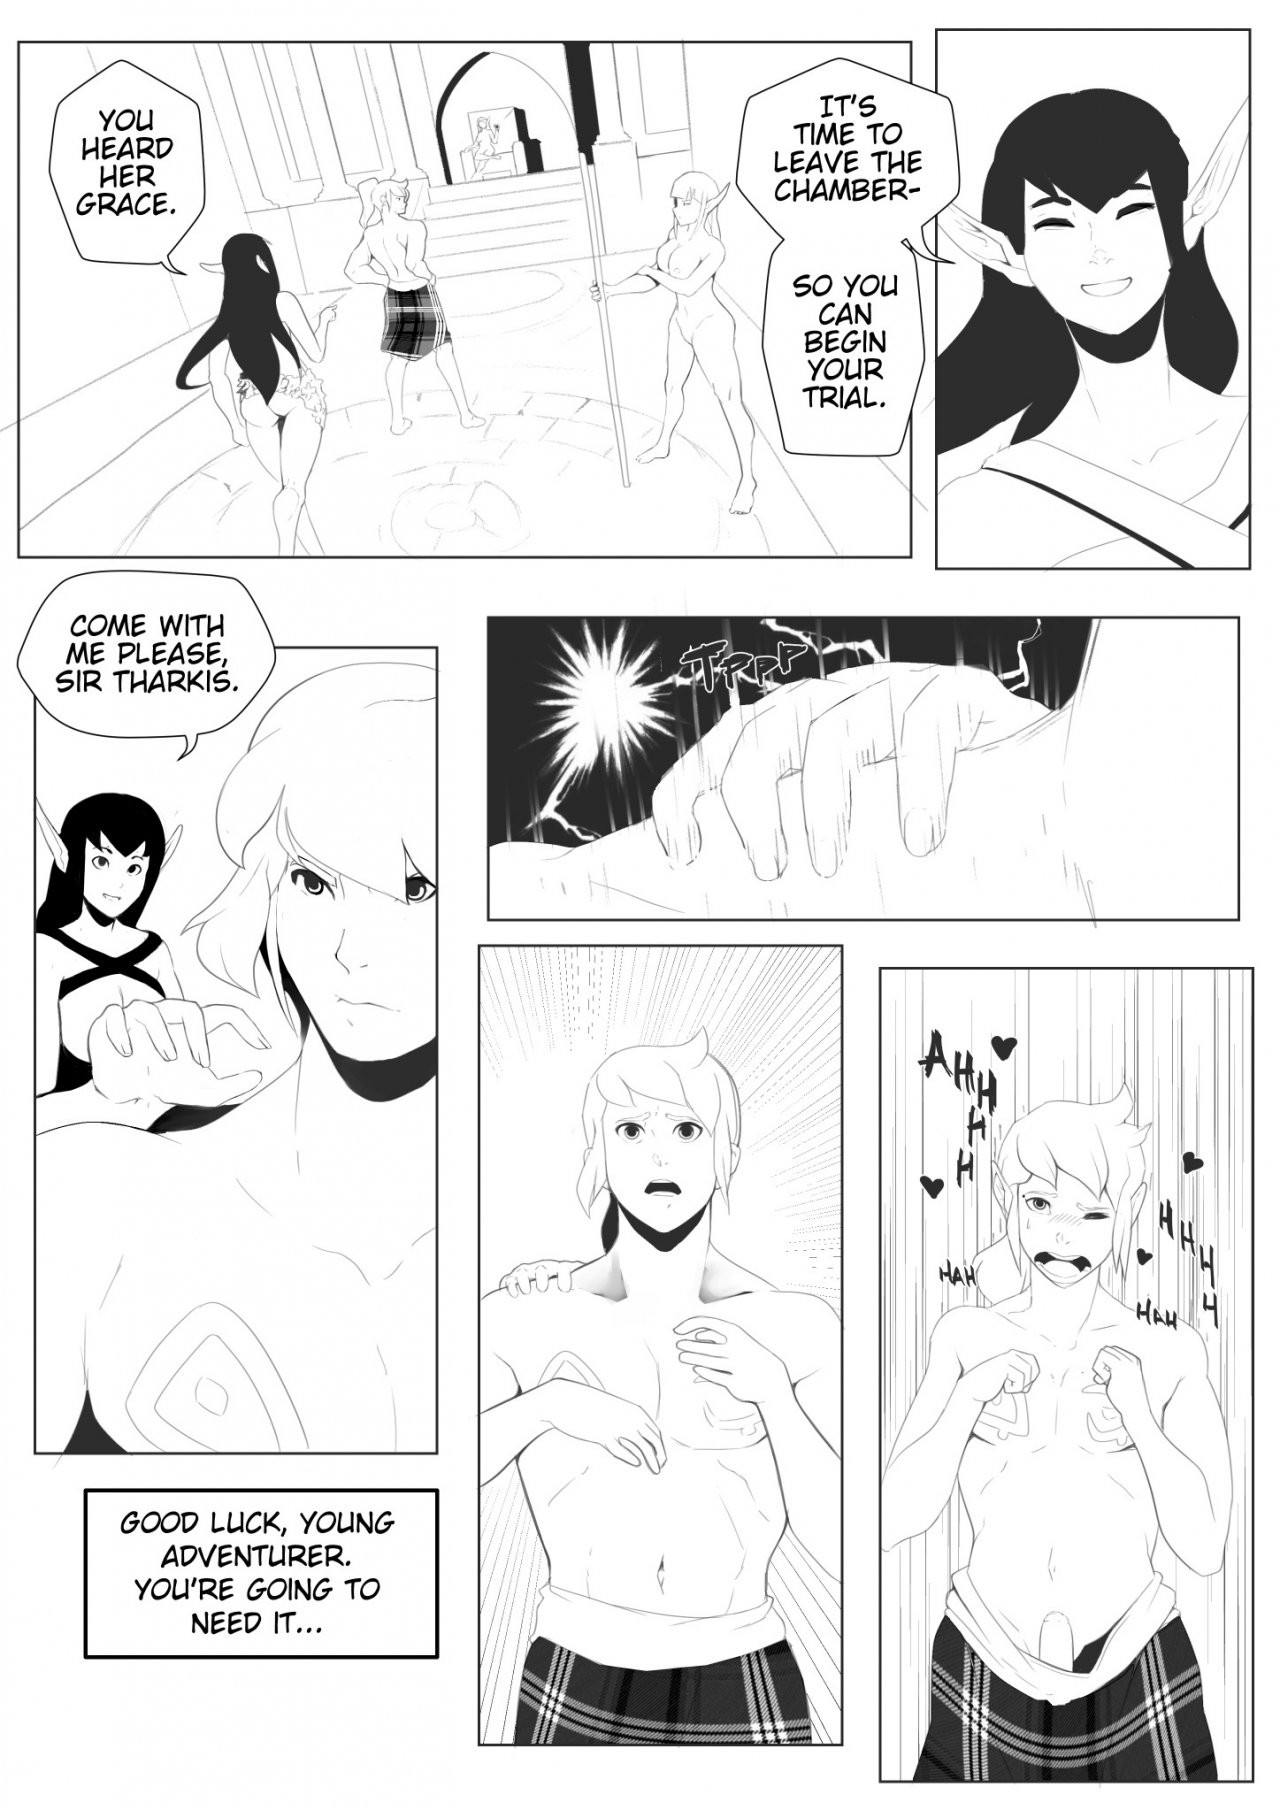 Tharkis' Trial porn comic picture 4